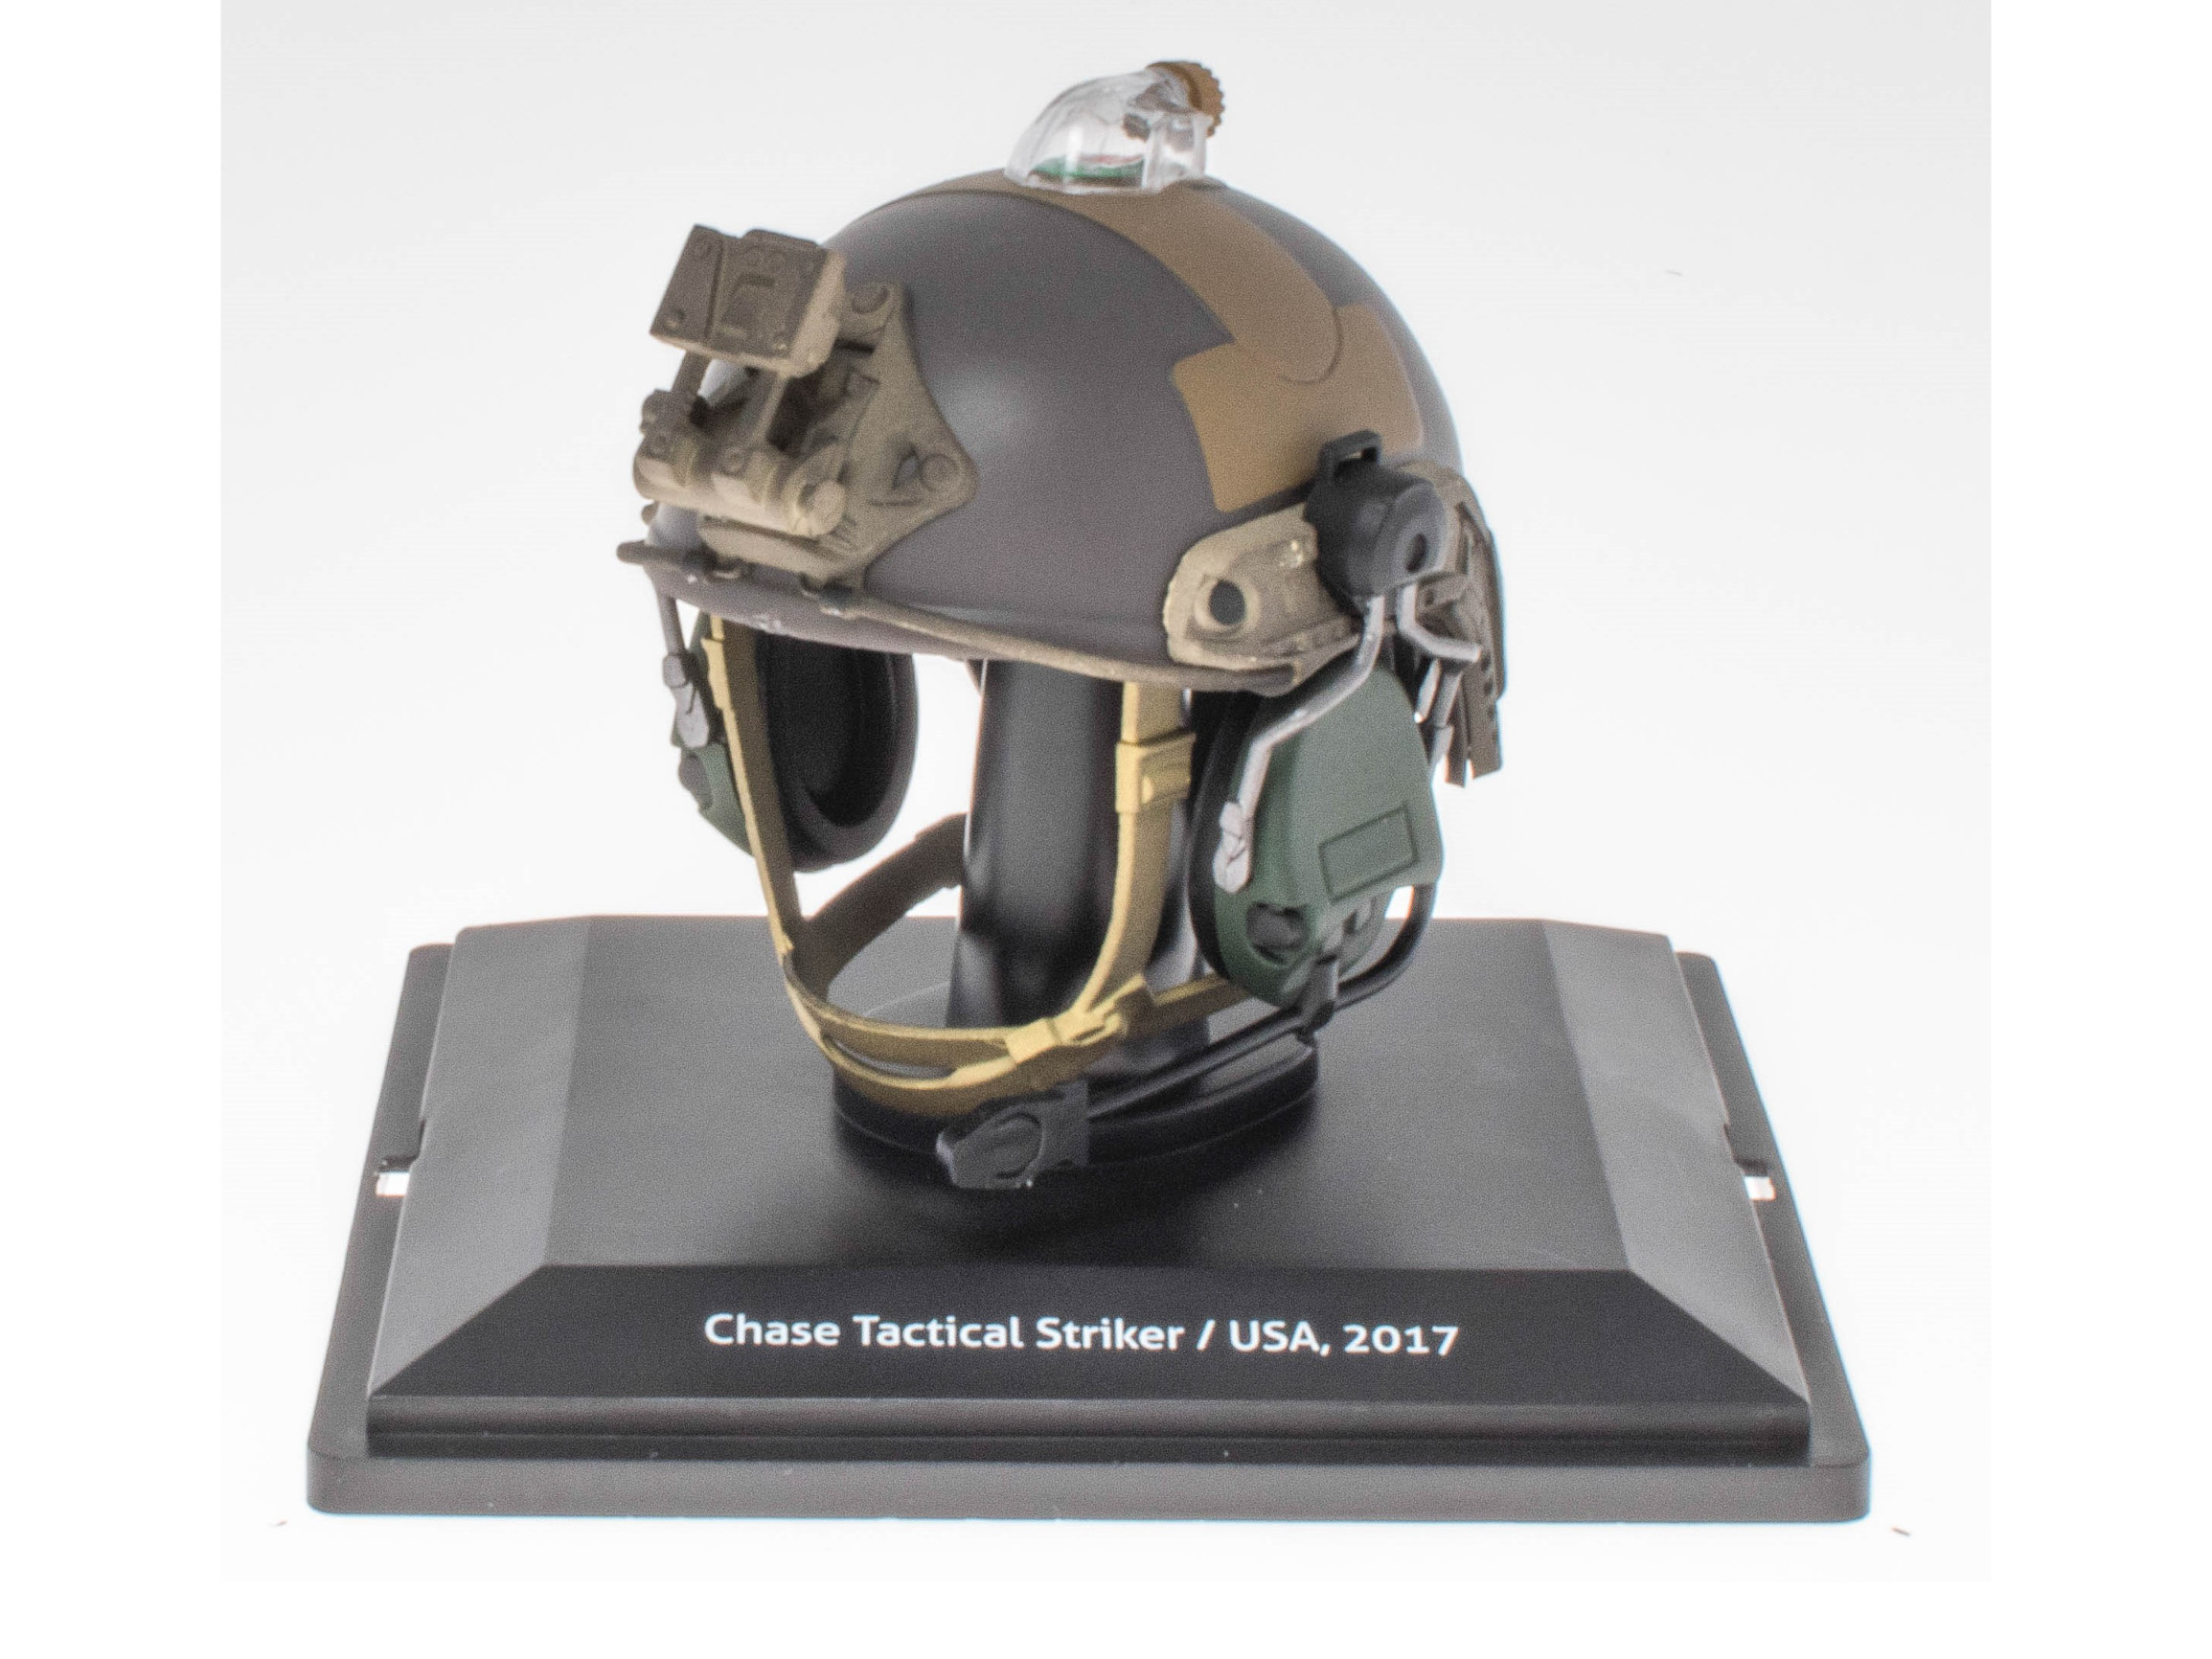 Chase Tactical Striker USA 2017